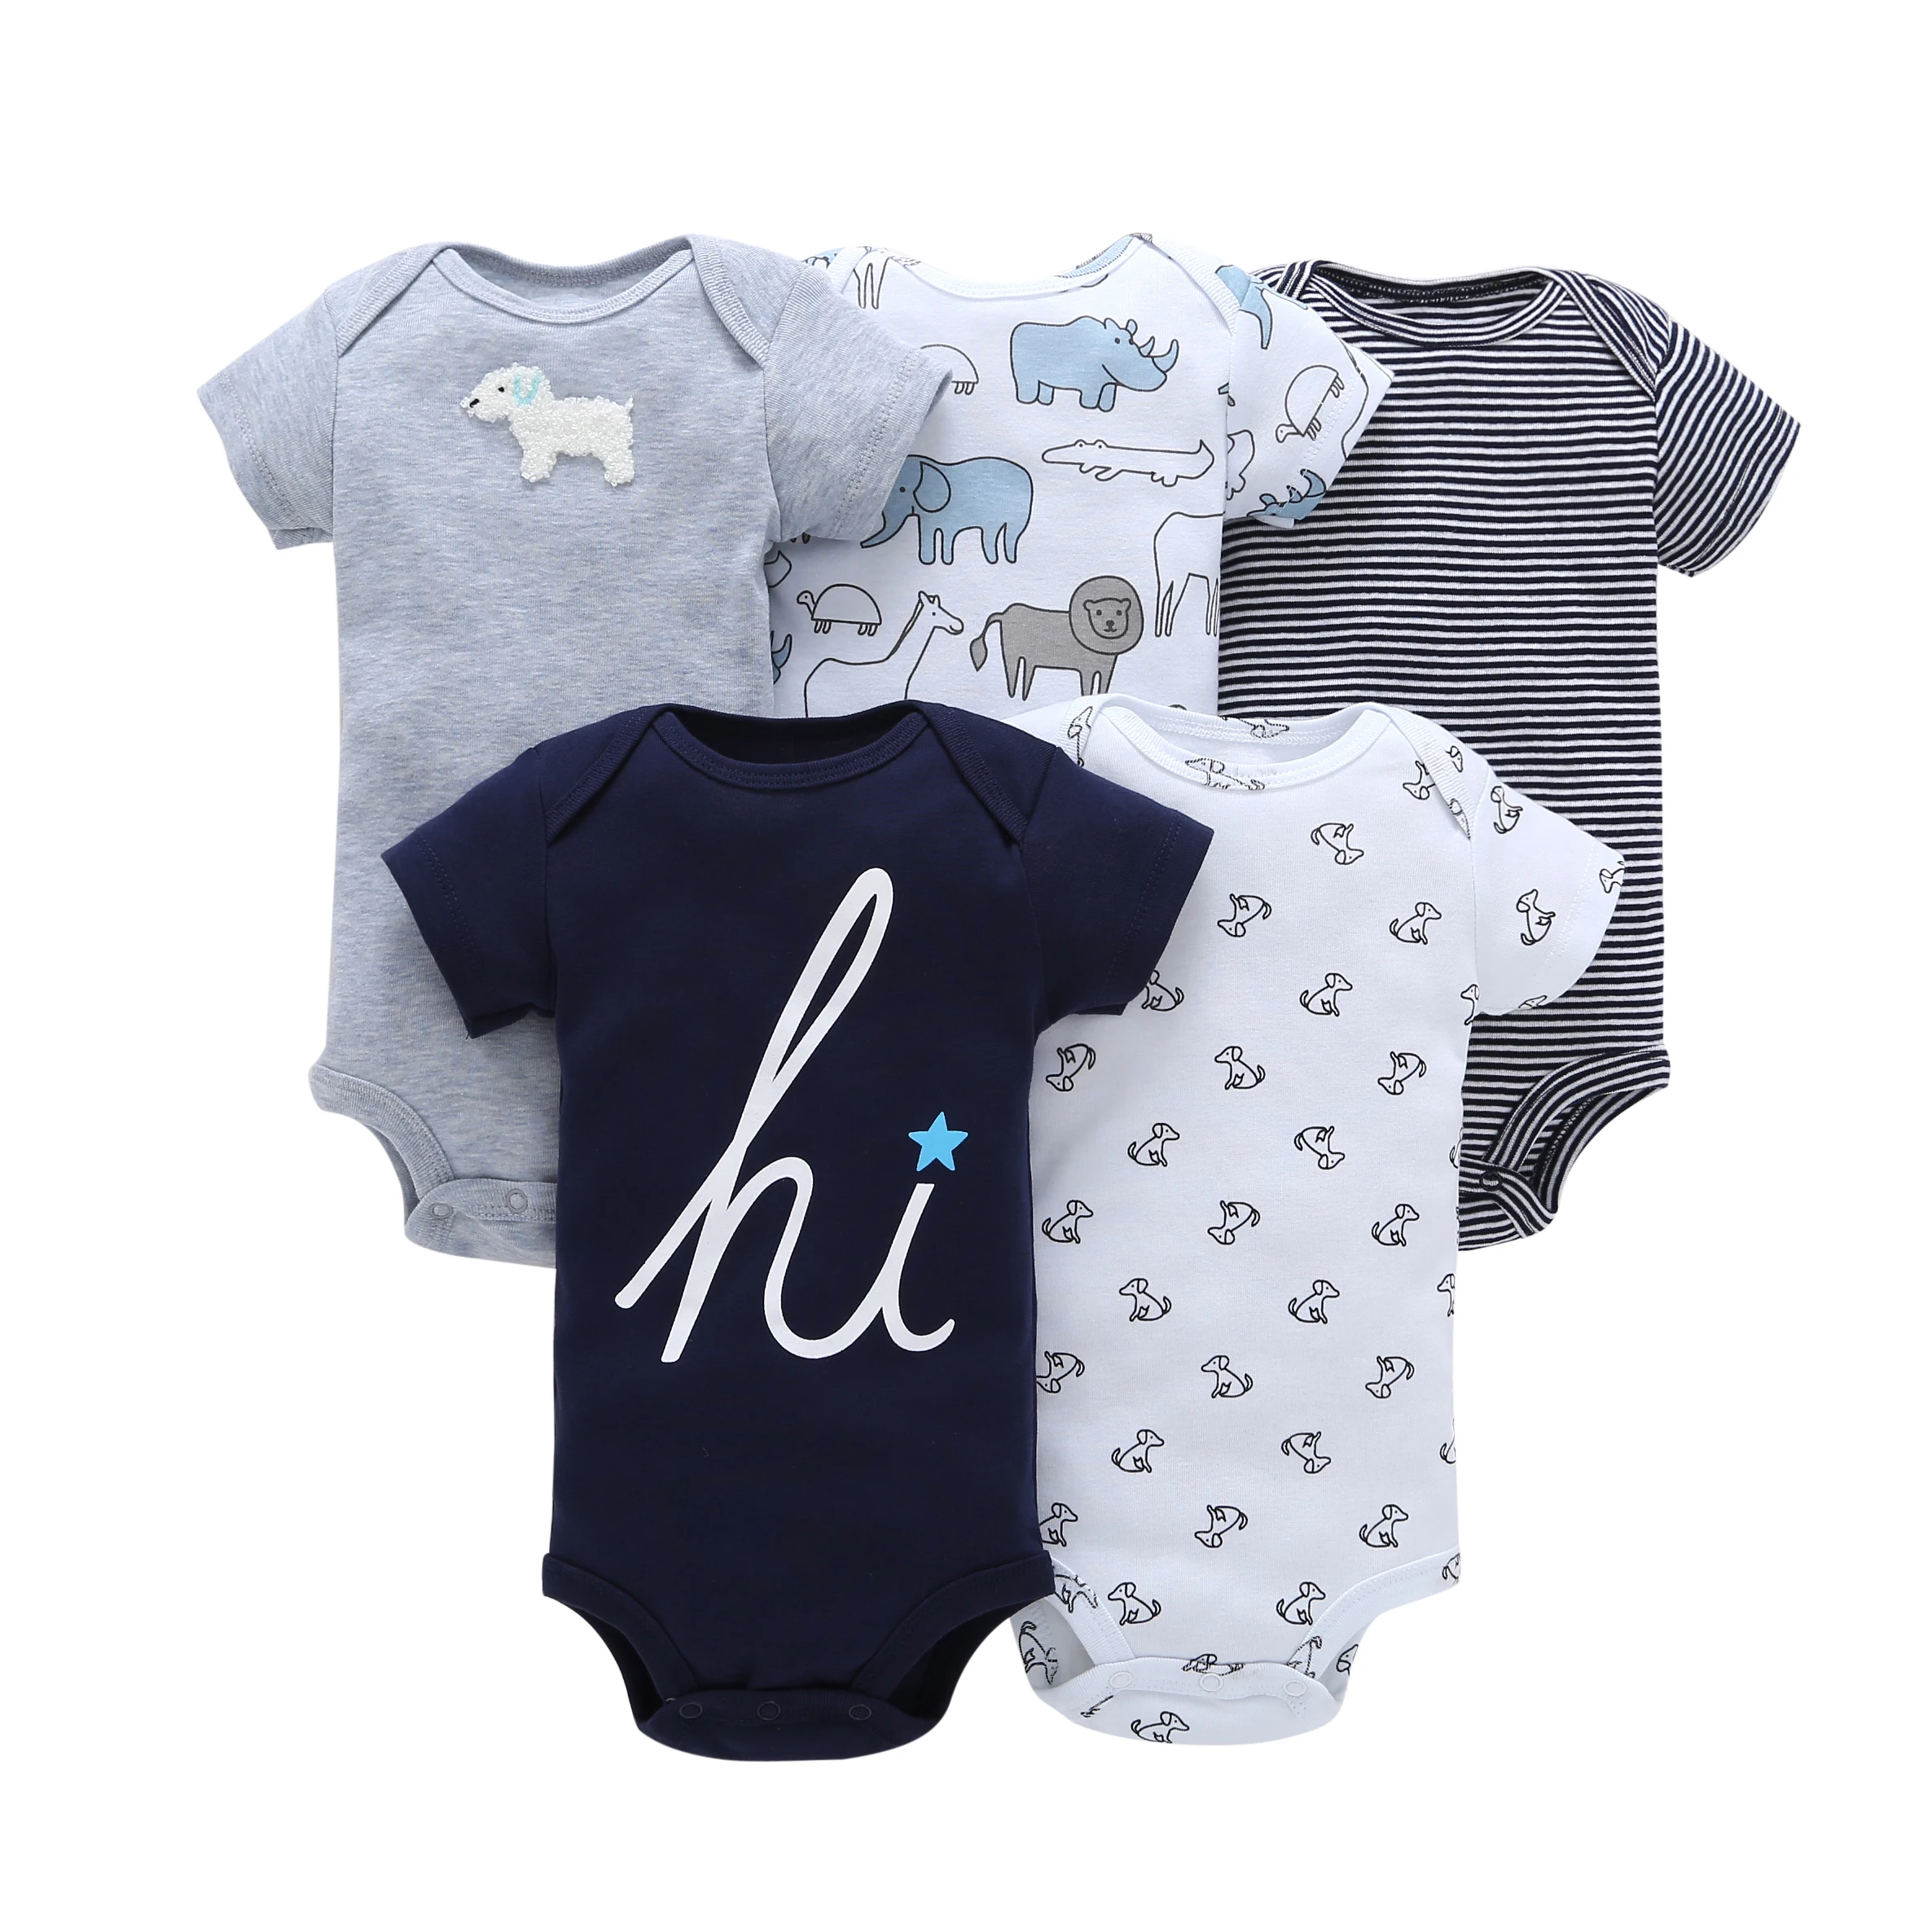 

High Quality Short-Sleeve 5Pieces Baby Bodysuit Set Import Baby Clothes From China, Mixed colors